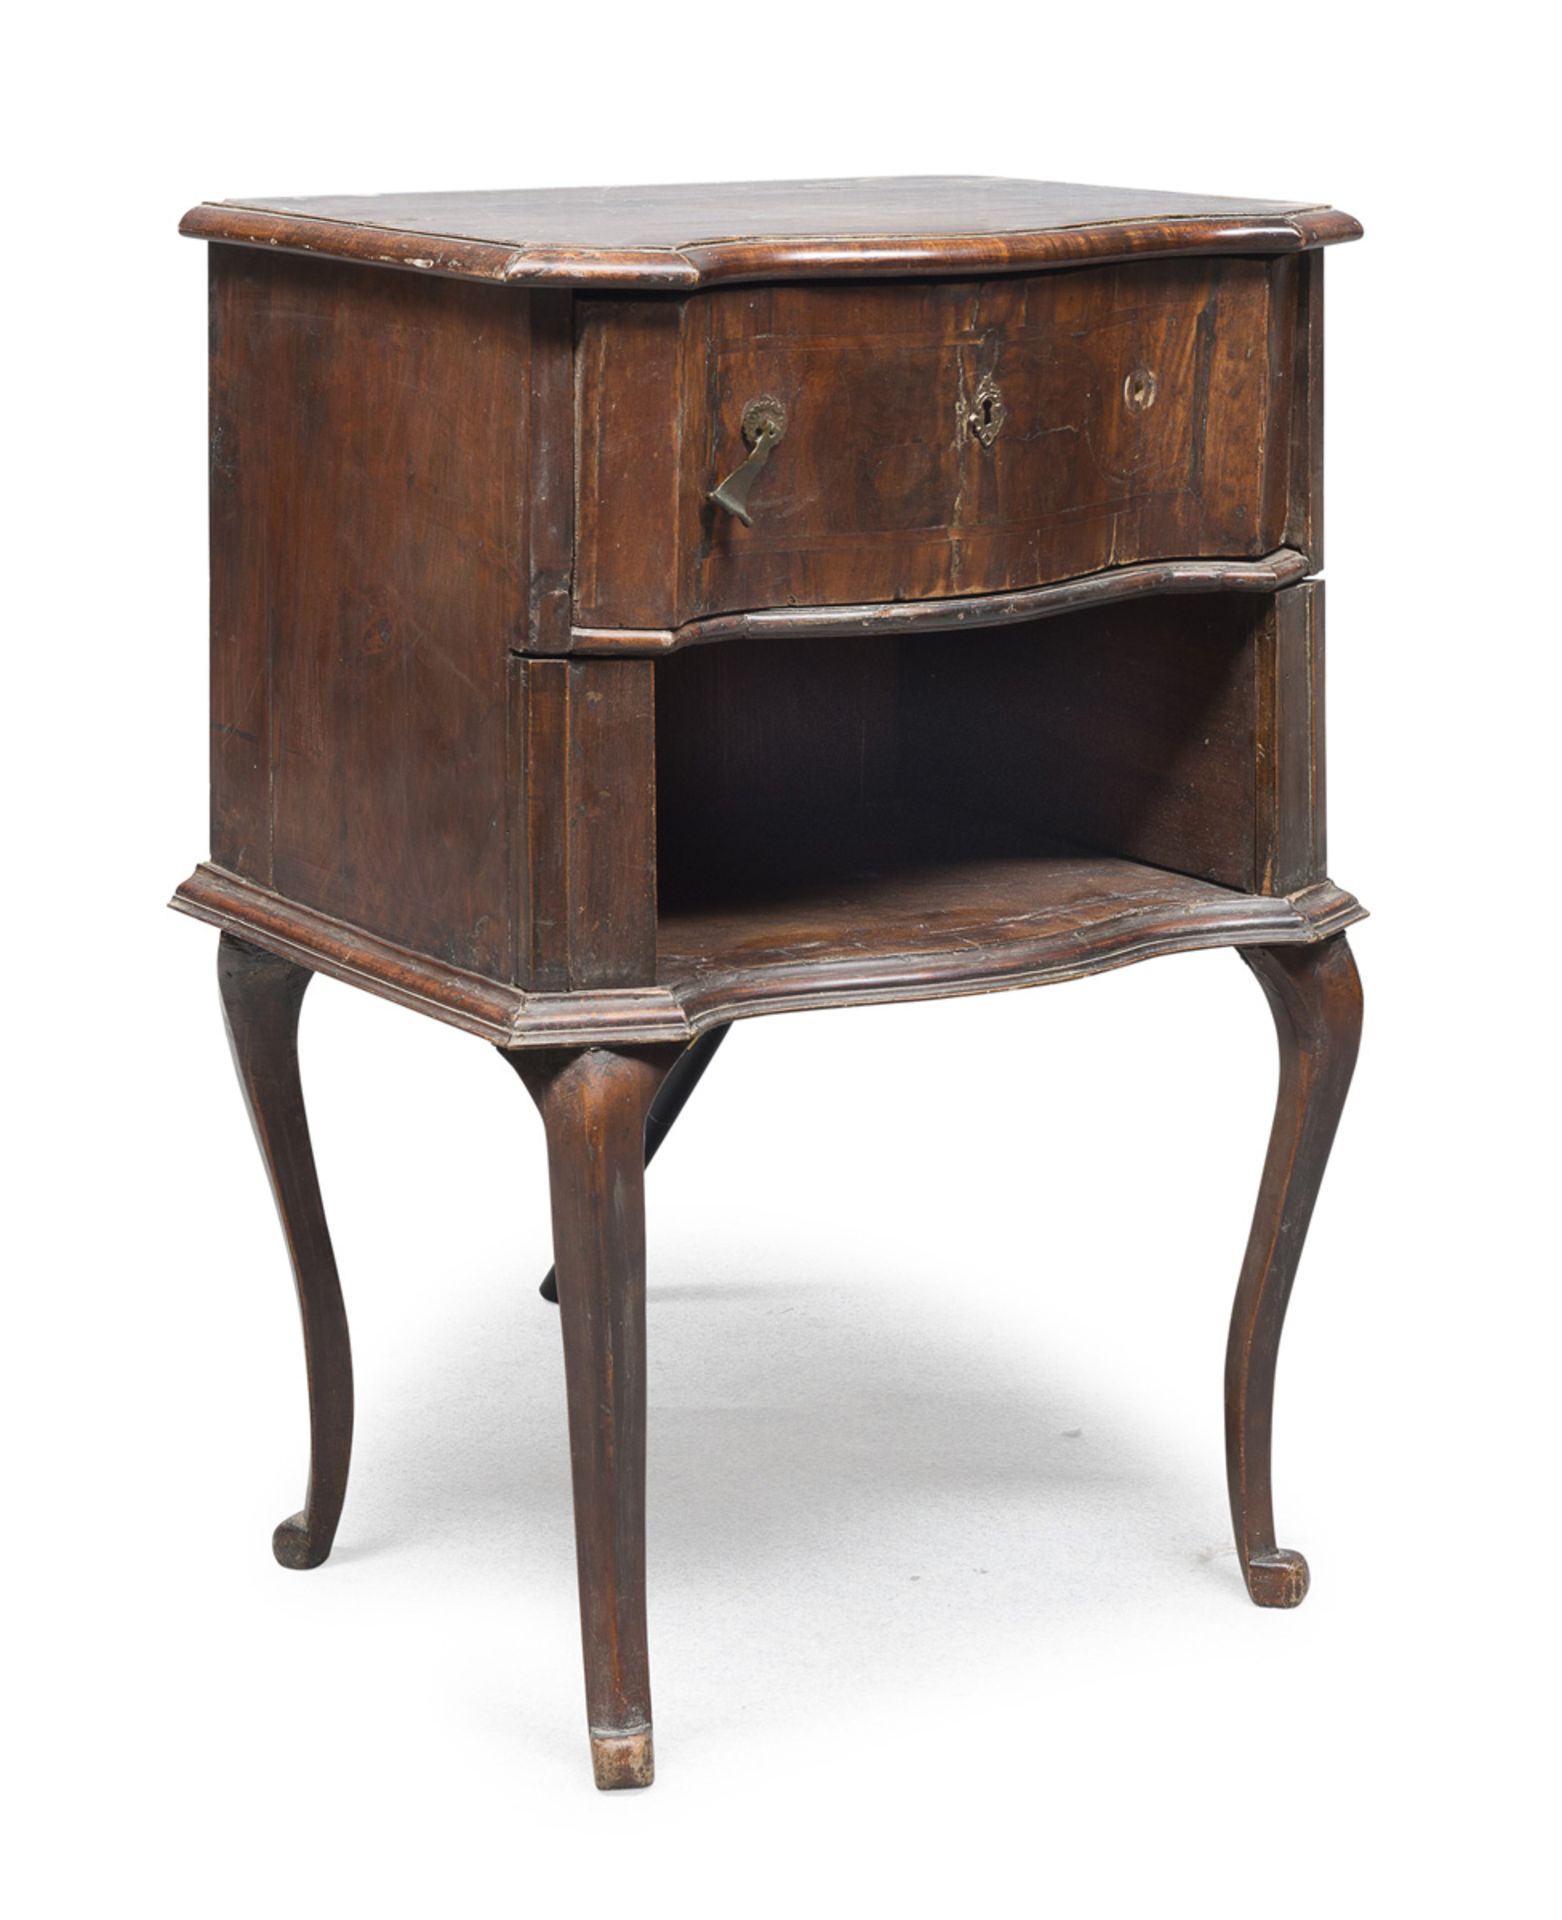 REMAINS OF BEDSIDE IN WALNUT VENICE 18TH CENTURY